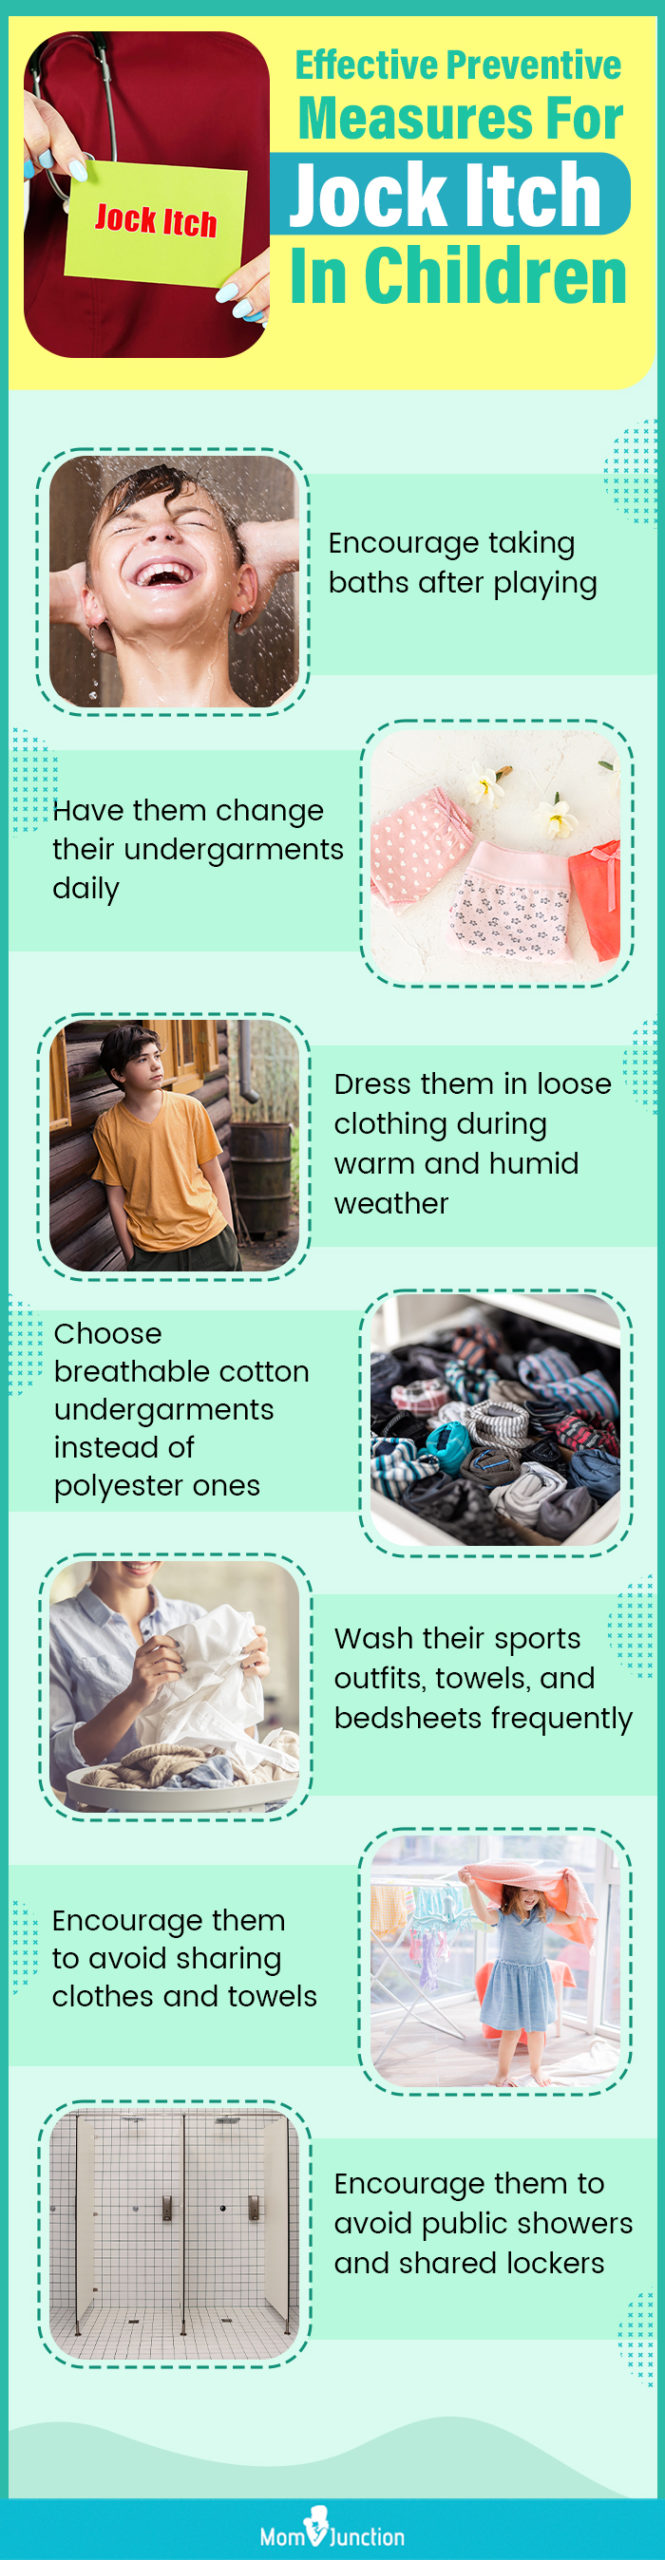 effective preventive measures for jock itch in children (infographic)